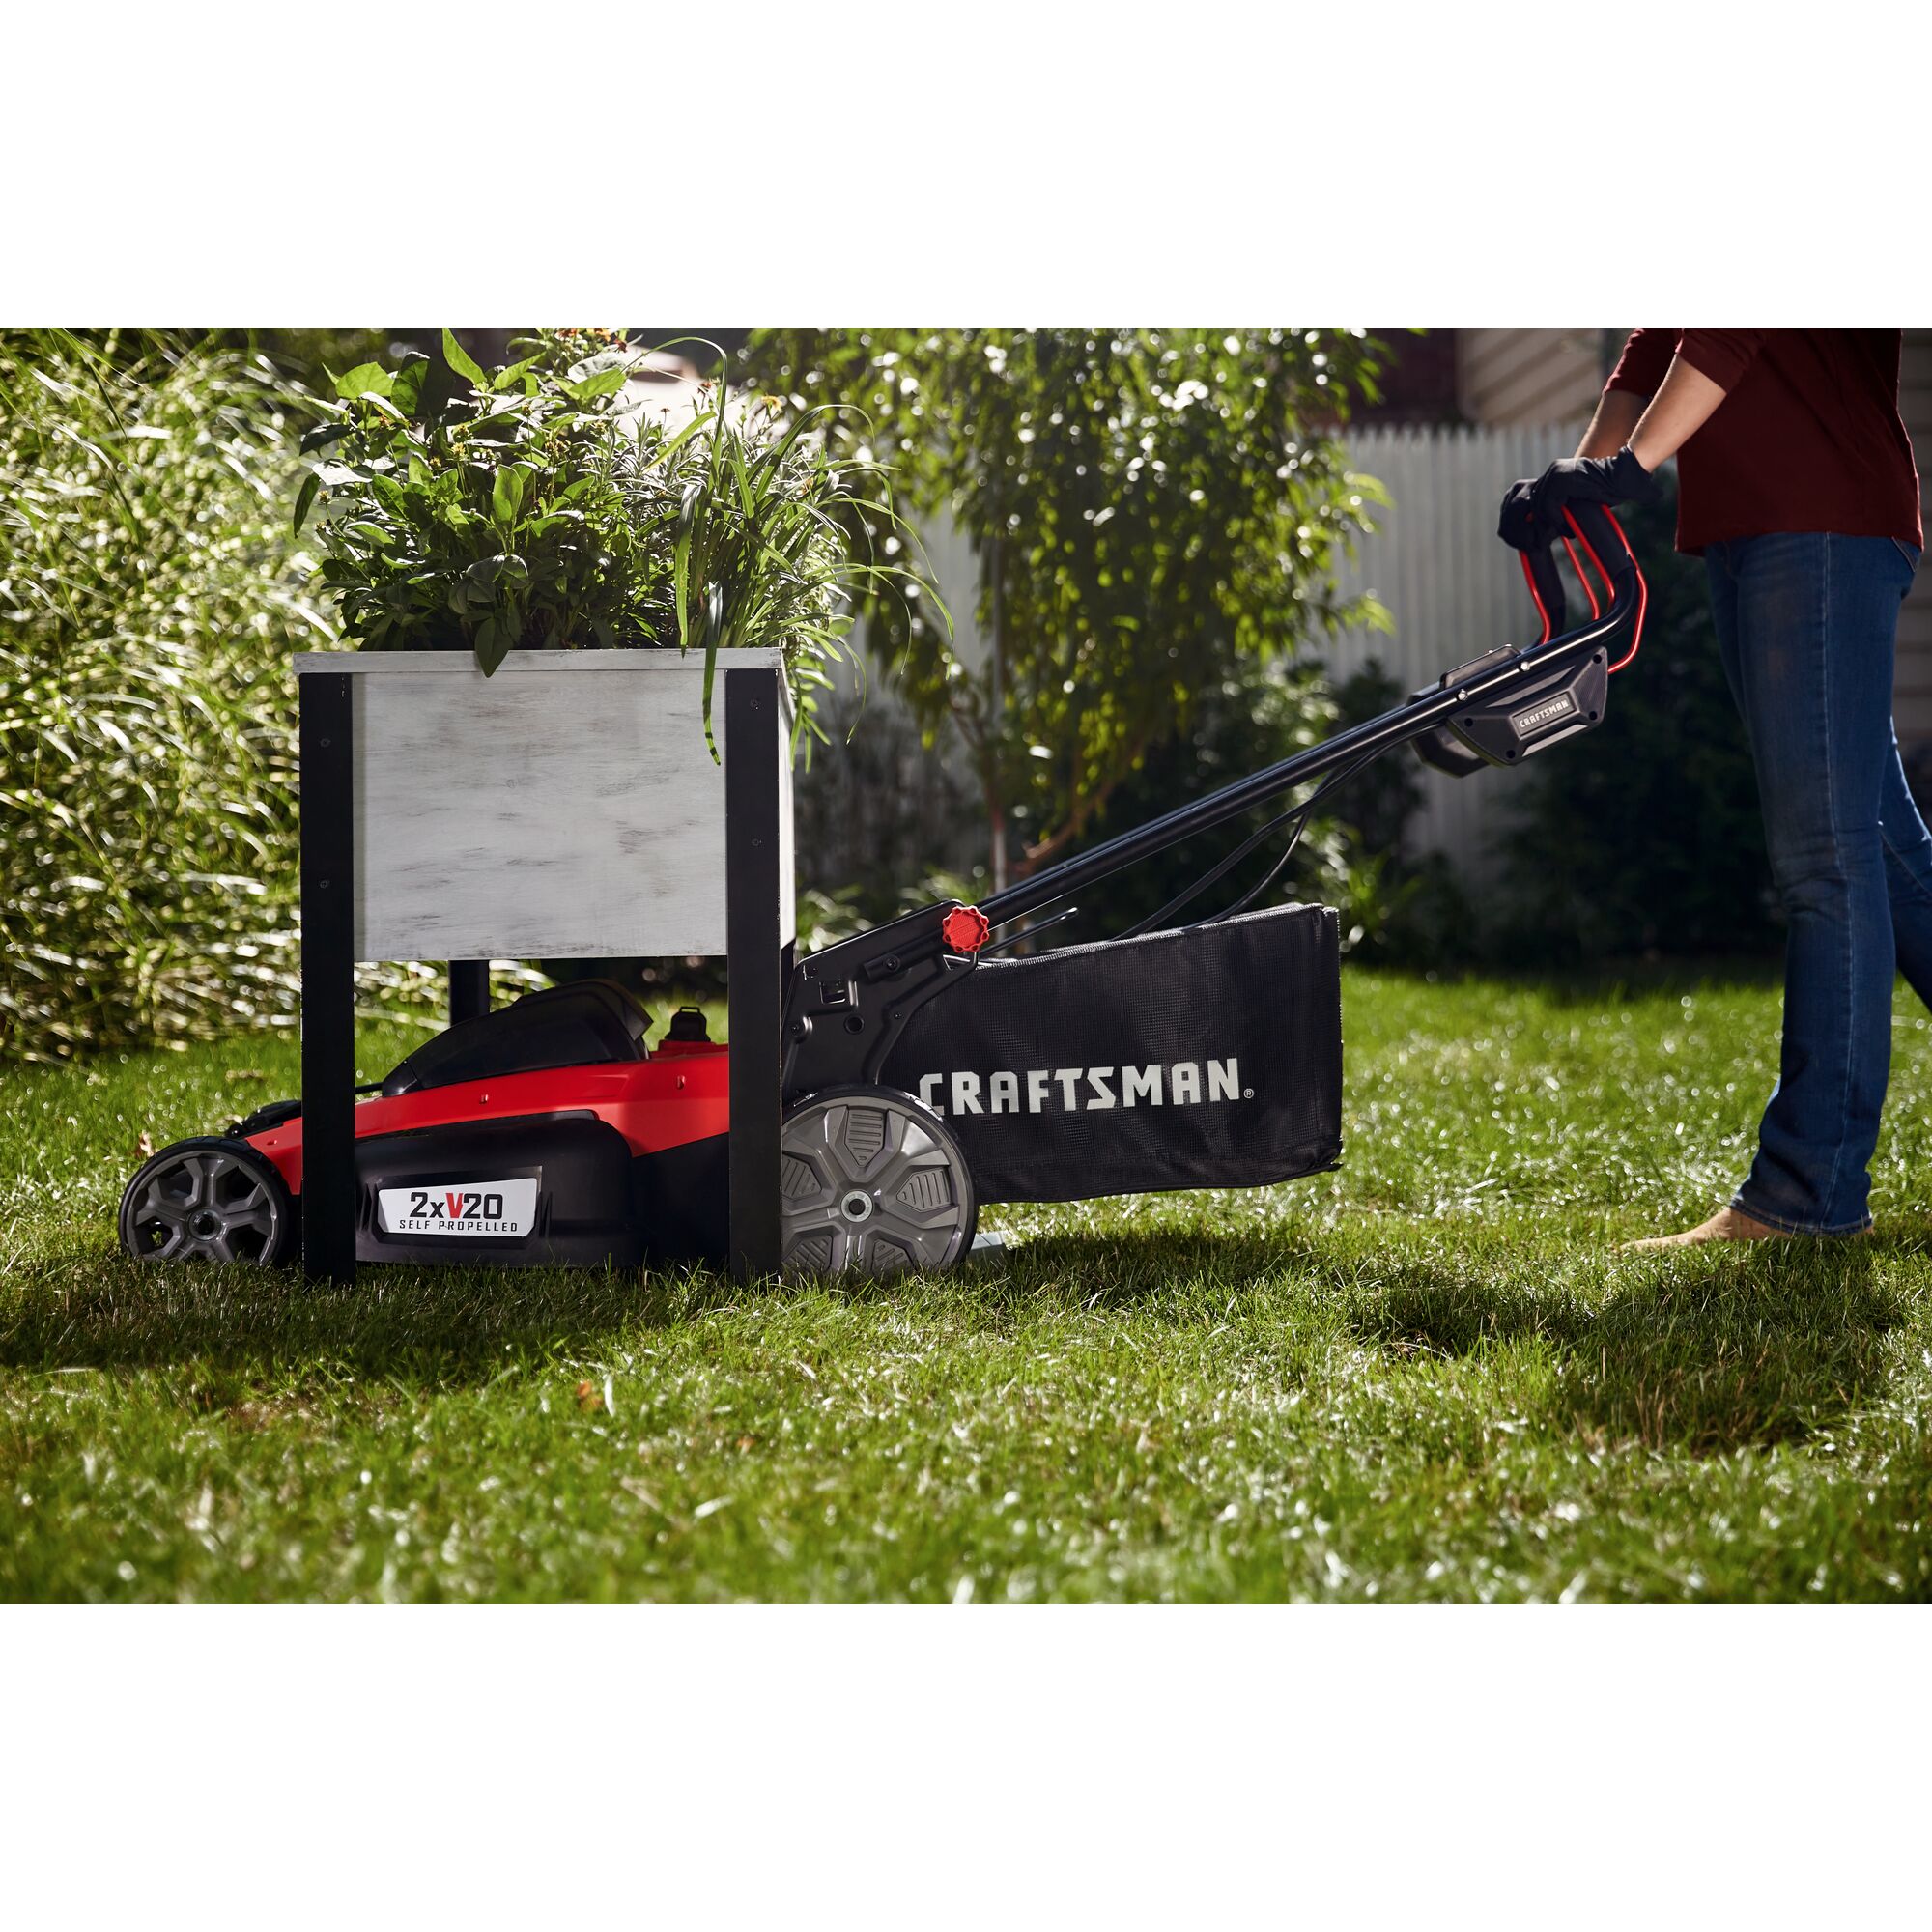 Low profile design with low clearance 13 inch deck height feature of 20 inch brushless cordless self propelled mower kit.